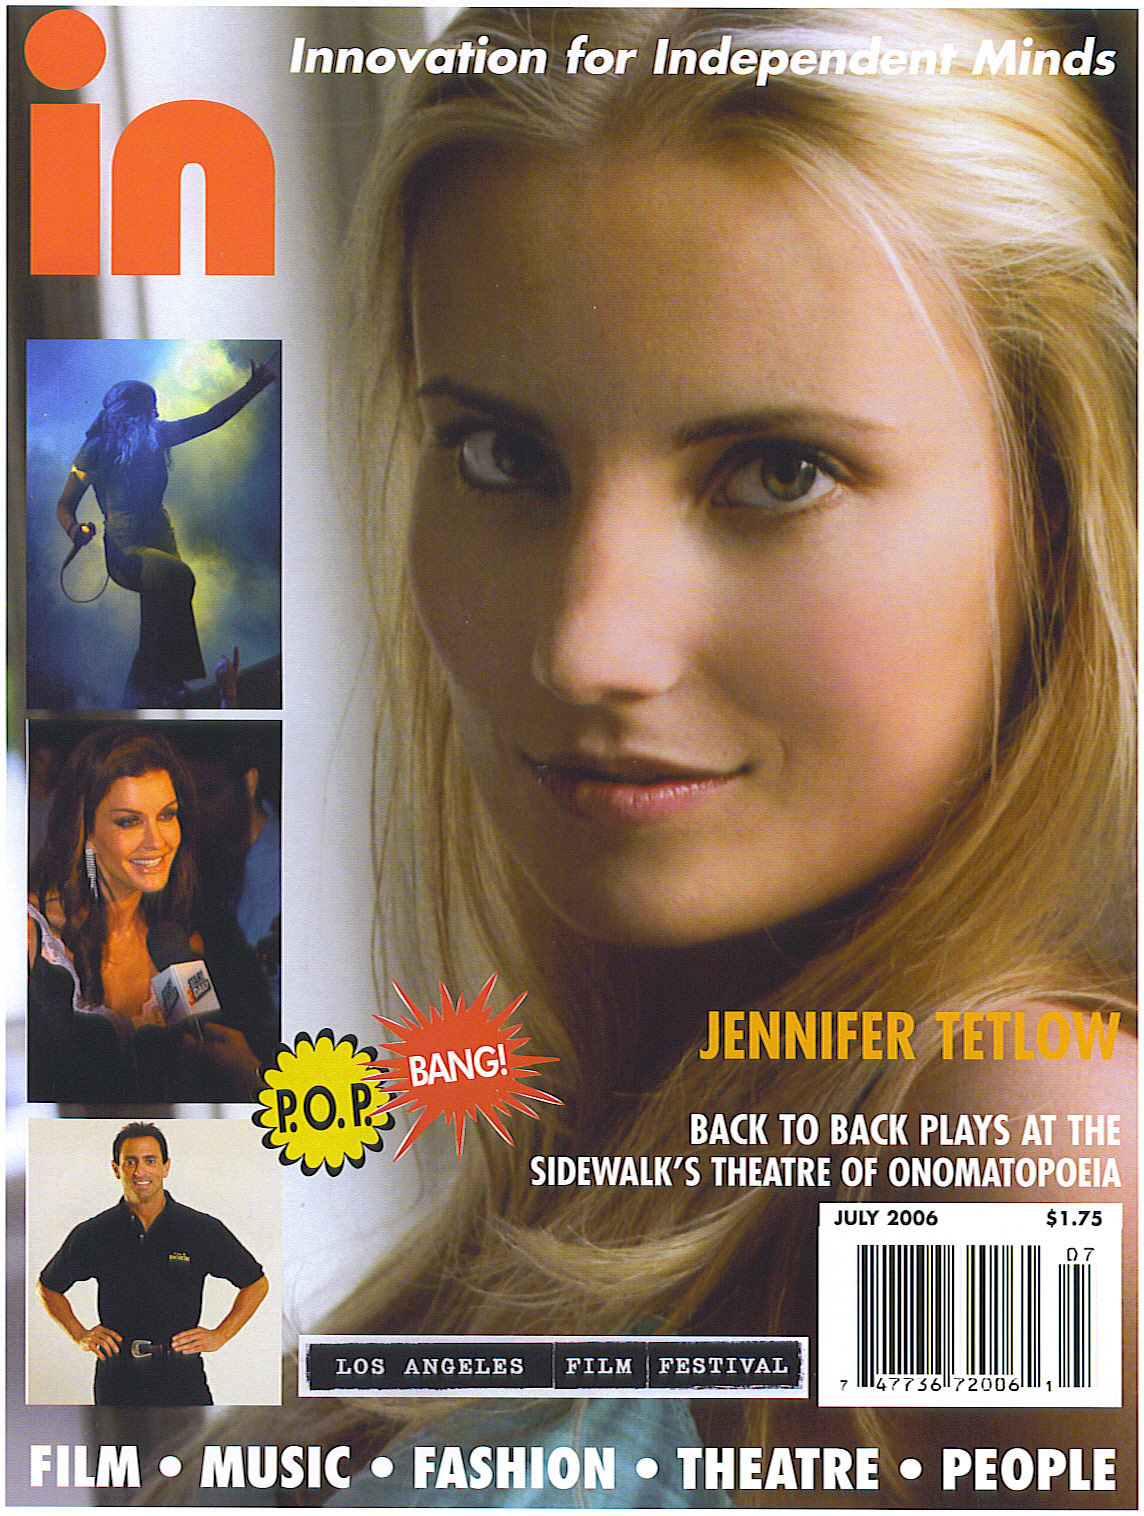 Jennifer Tetlow on the Cover of In Magazine